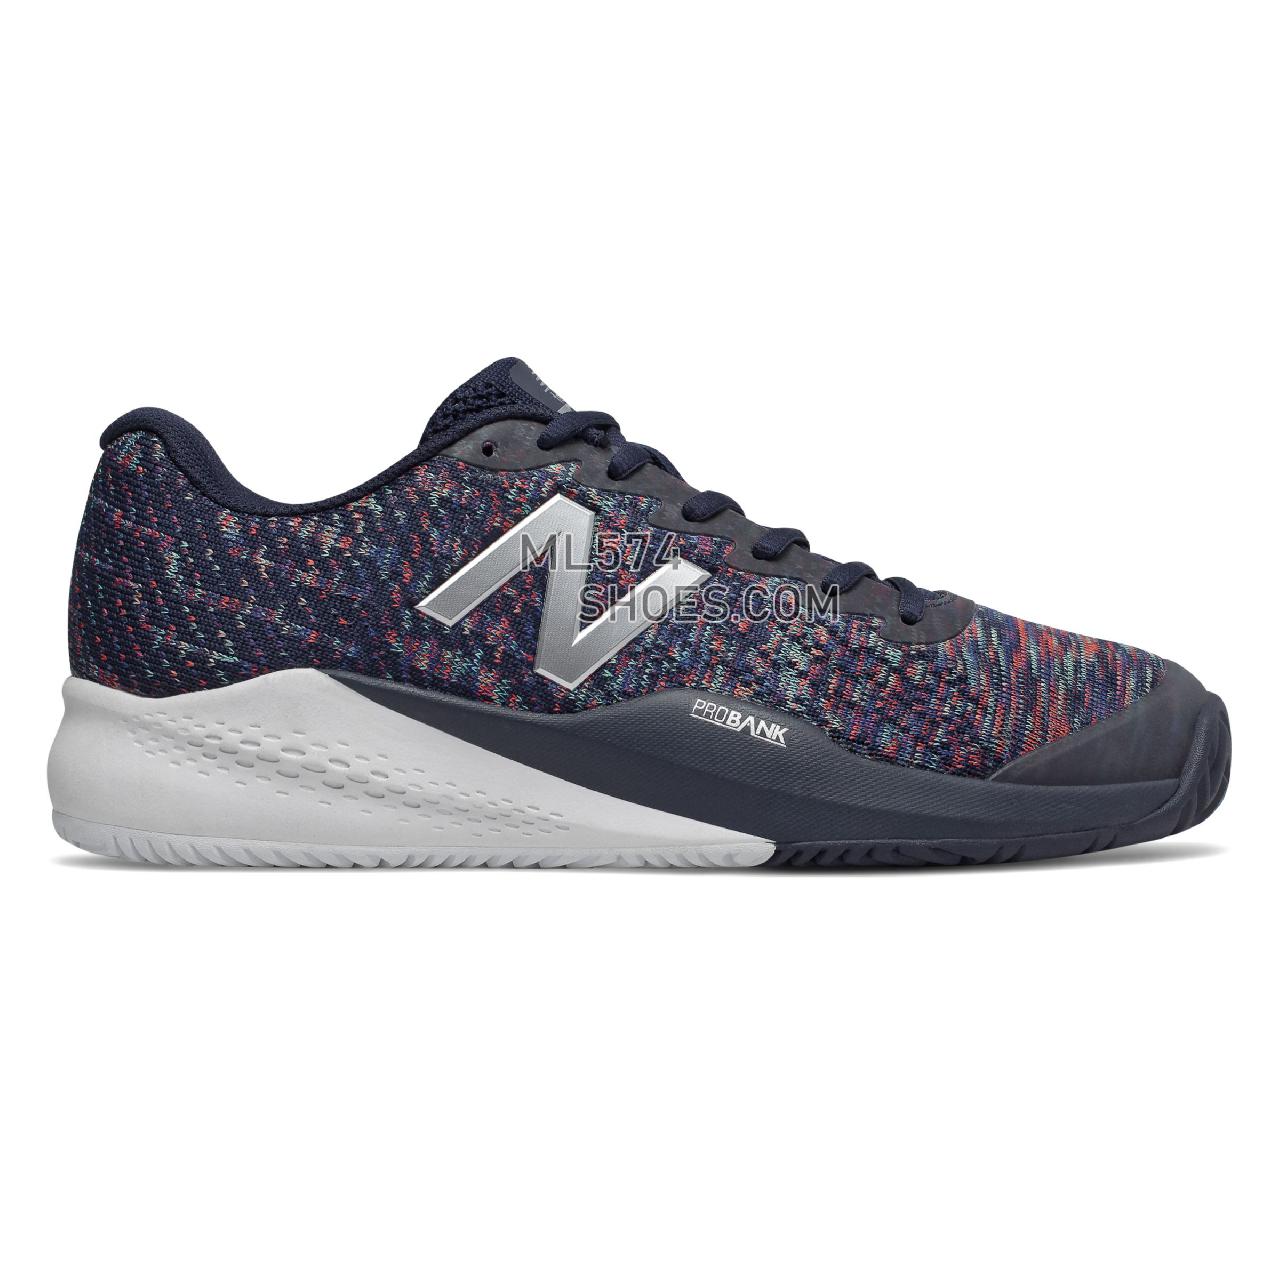 New Balance 996v3 - Men's Tennis - Pigment with Multi Color - MCH996Y3